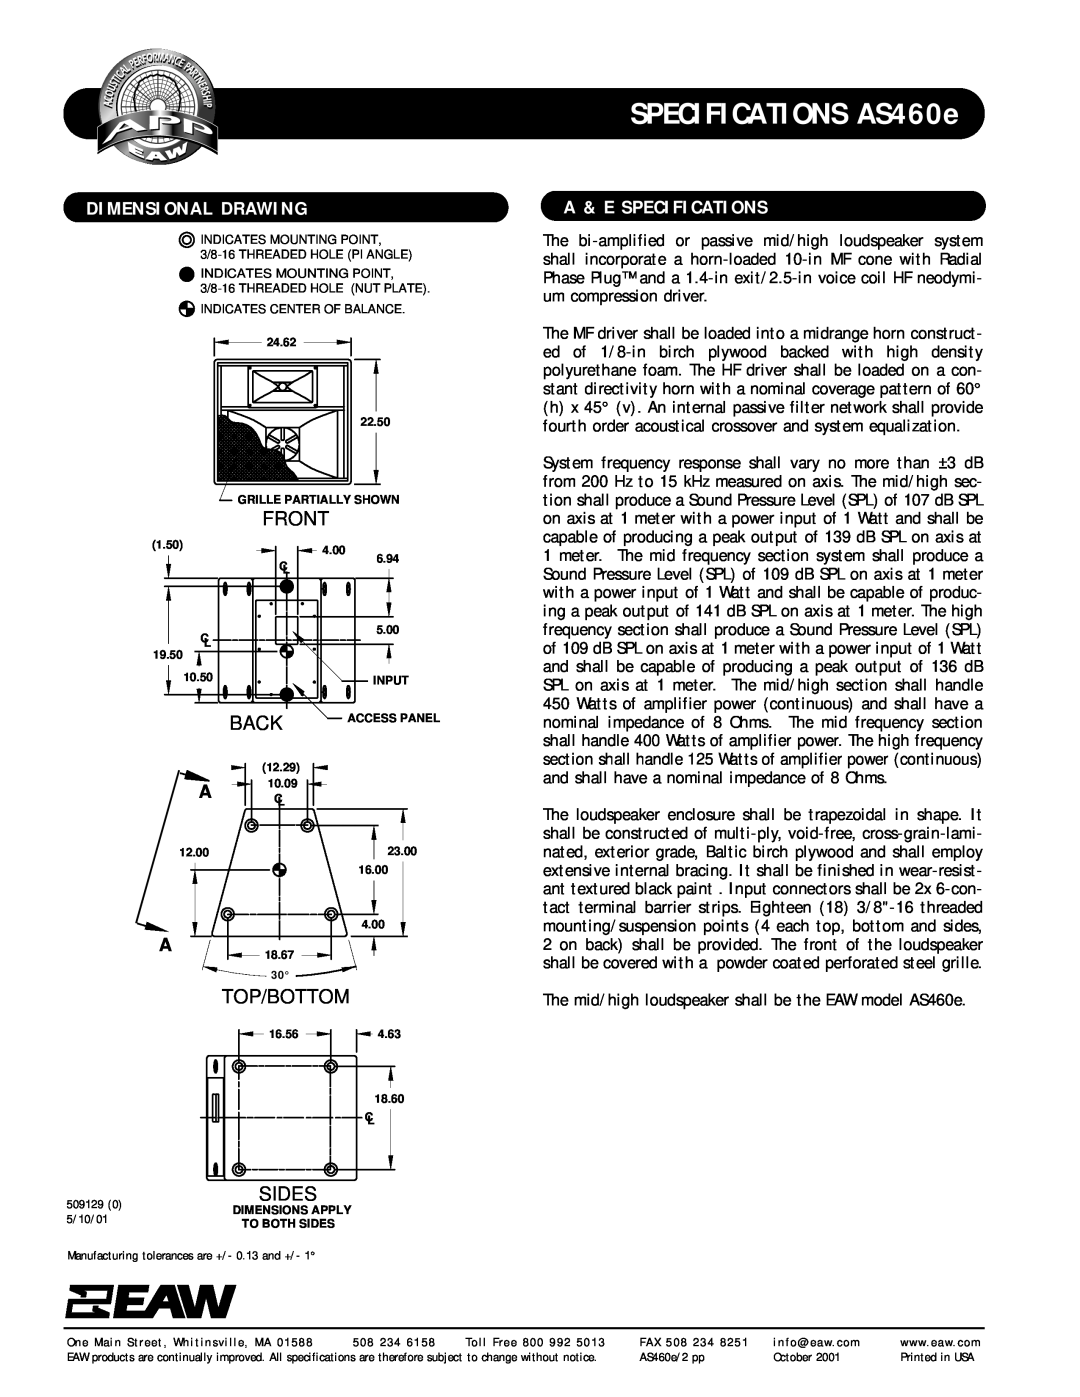 EAW specifications Dimensional Drawing, A & E Specifications, SPECIFICATIONS AS460e, Front, Sides, Back 